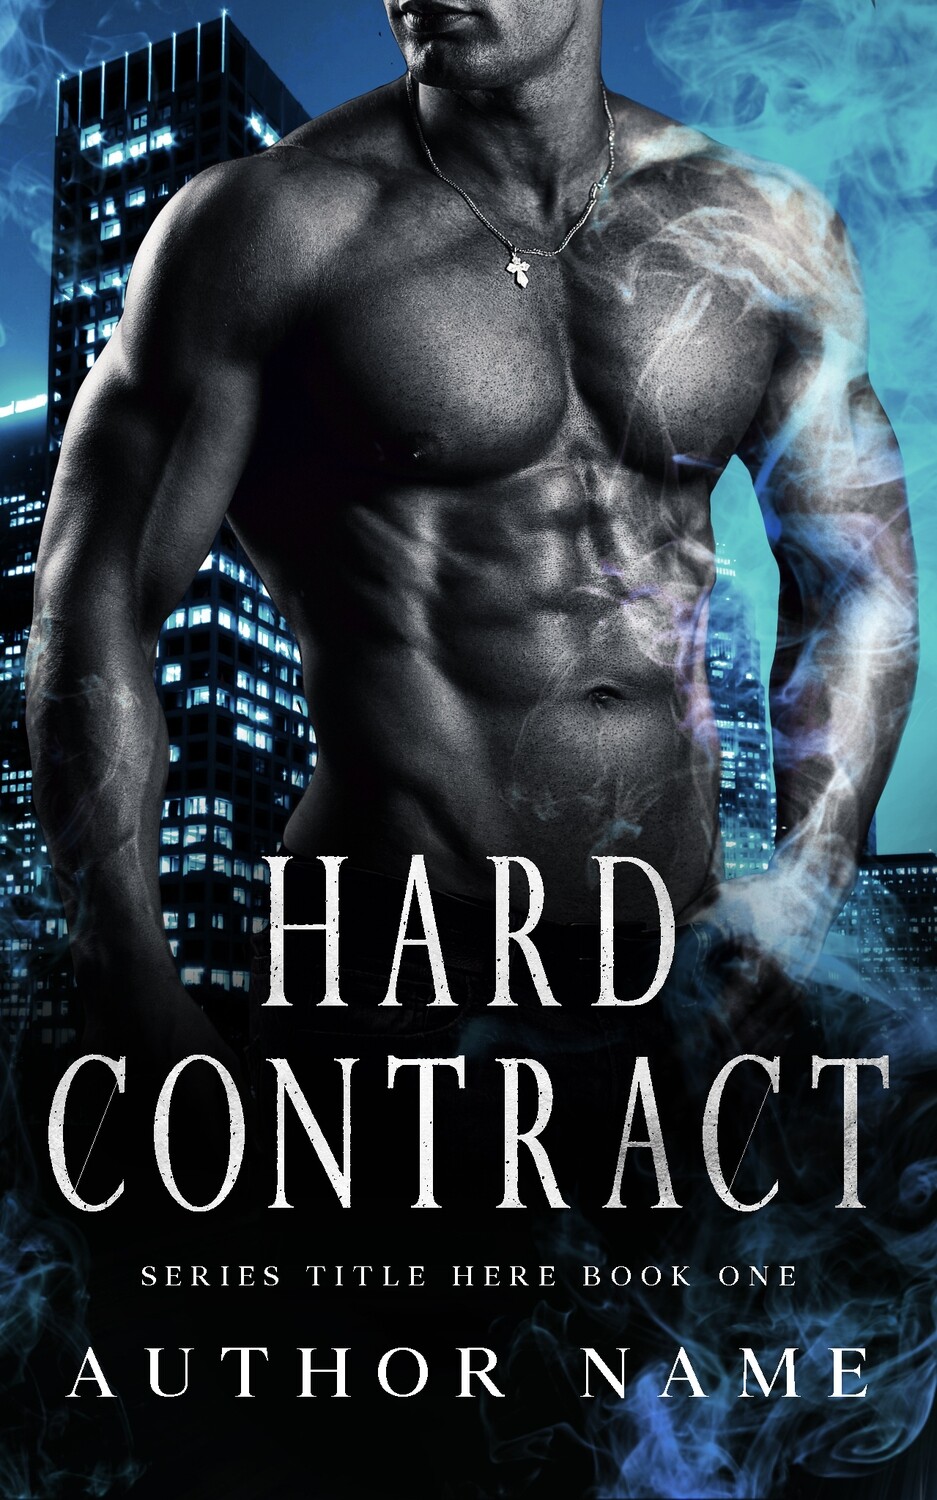 HARD CONTRACT